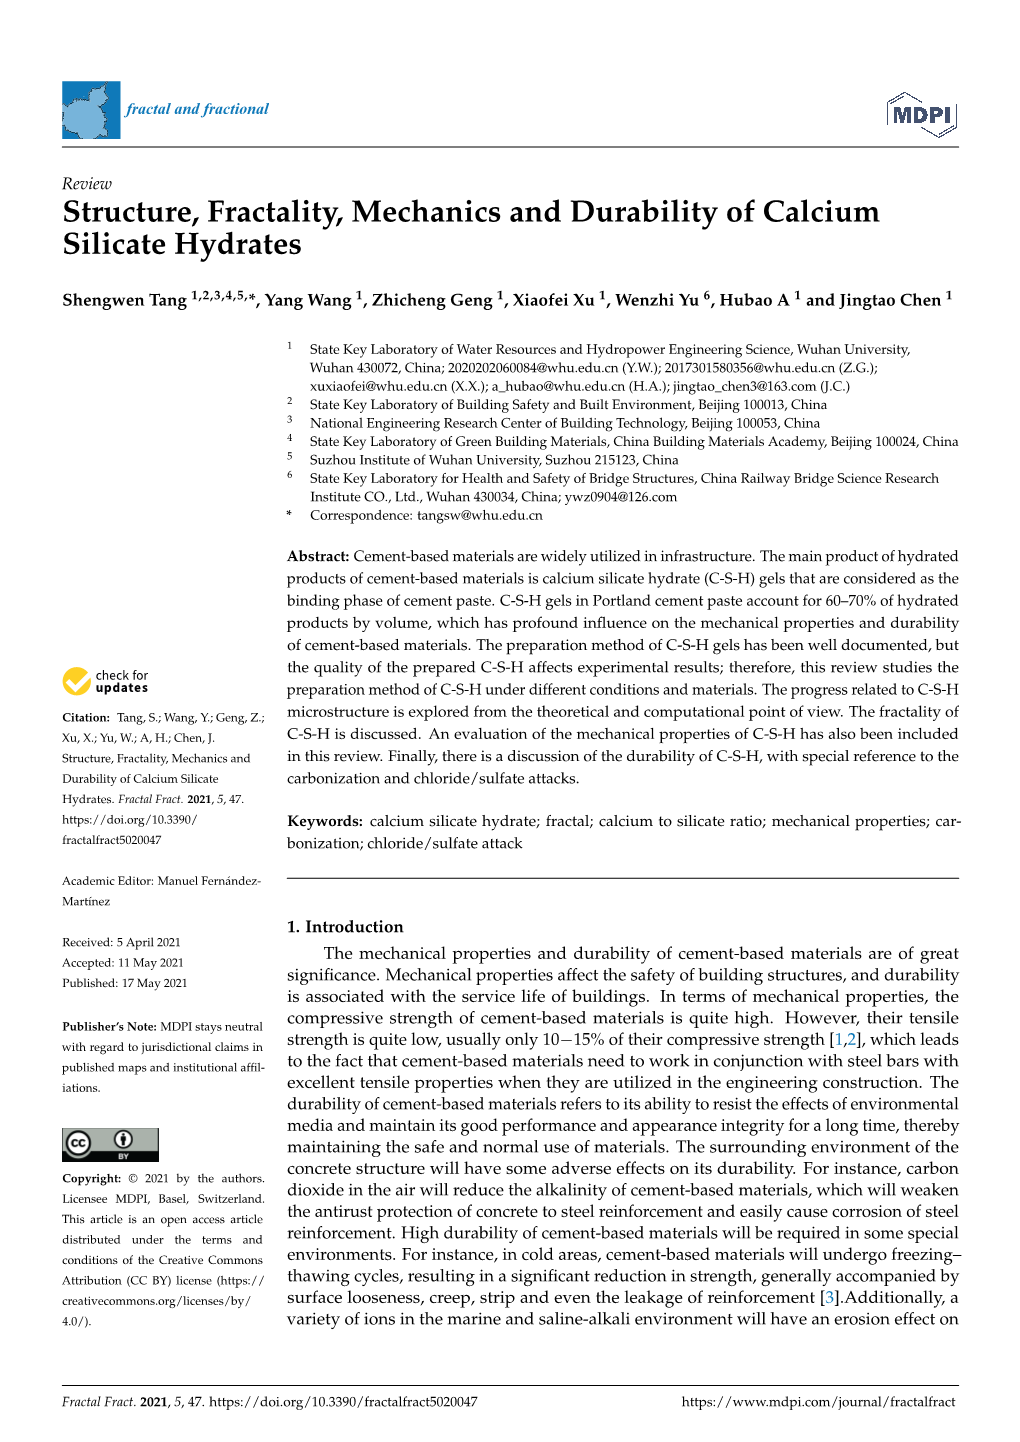 Structure, Fractality, Mechanics and Durability of Calcium Silicate Hydrates